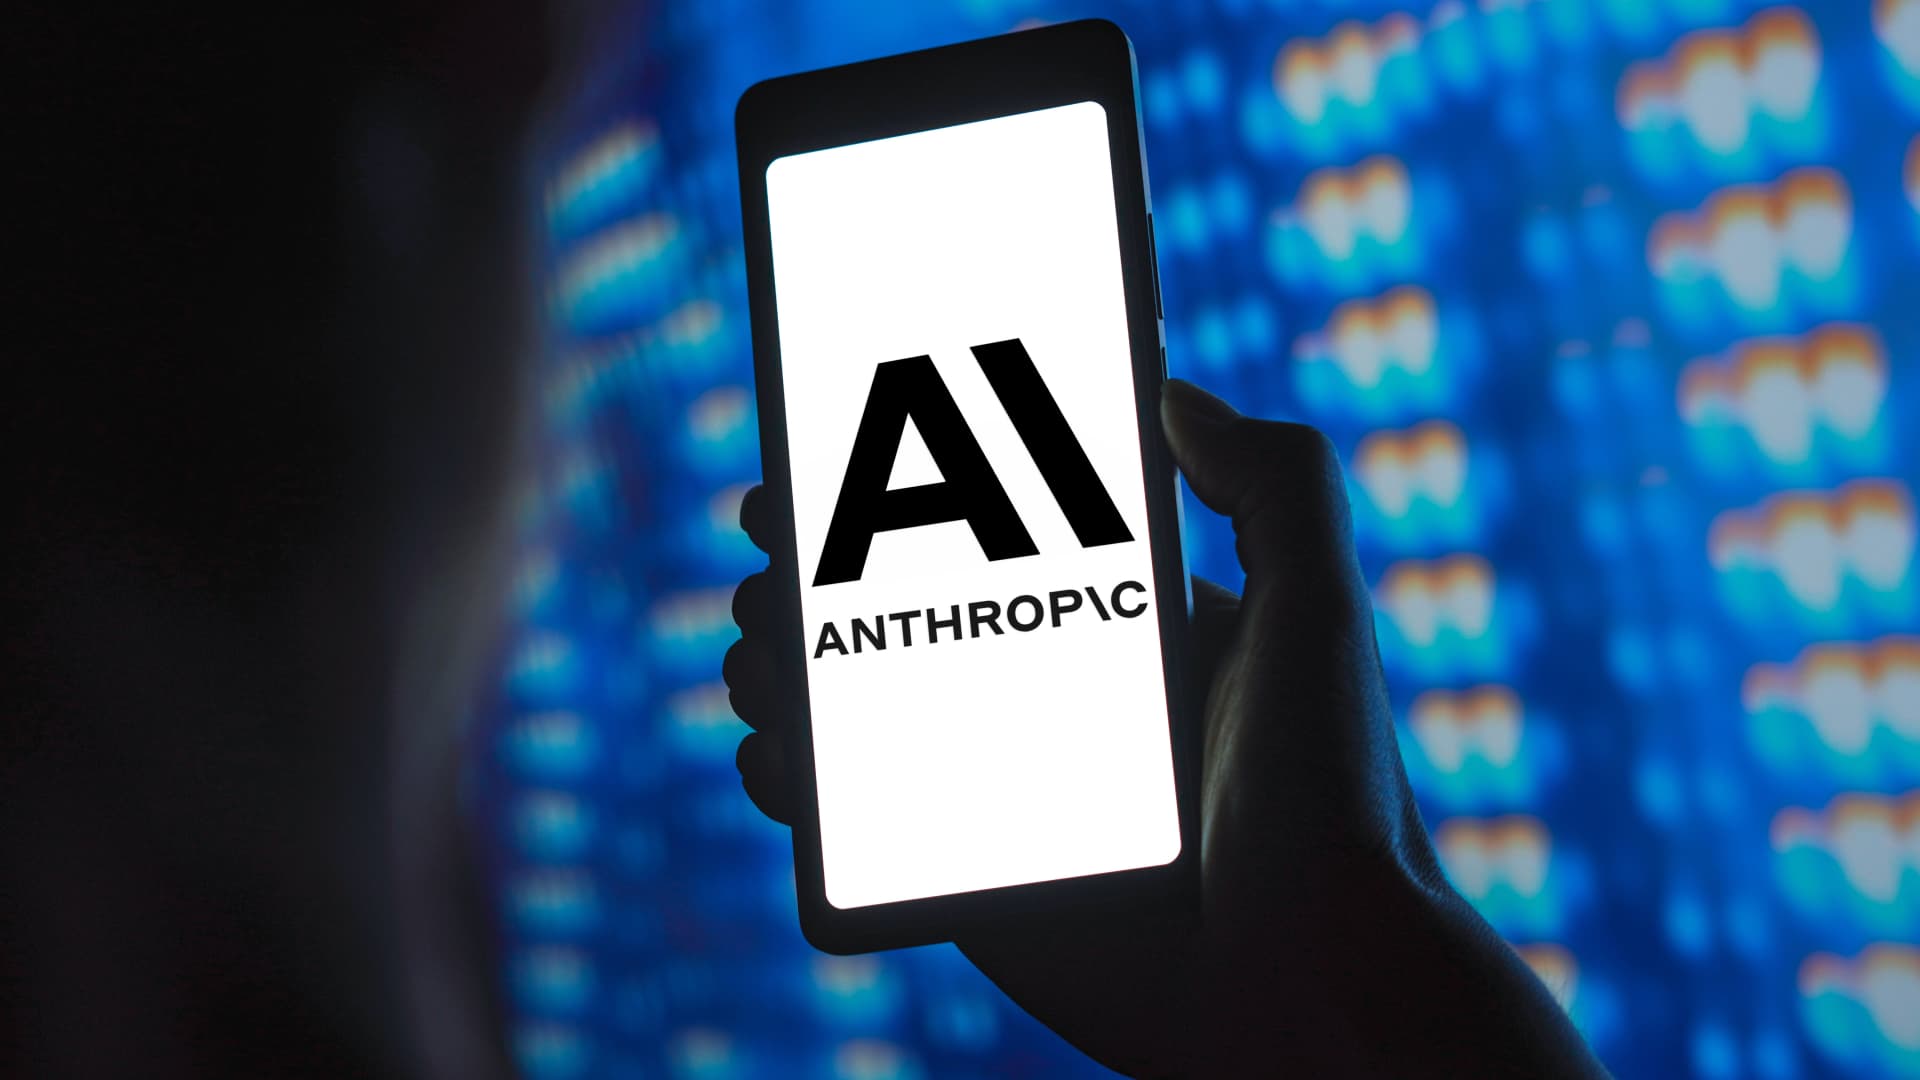 Amazon-backed Anthropic launches its Claude AI chatbot across Europe [Video]